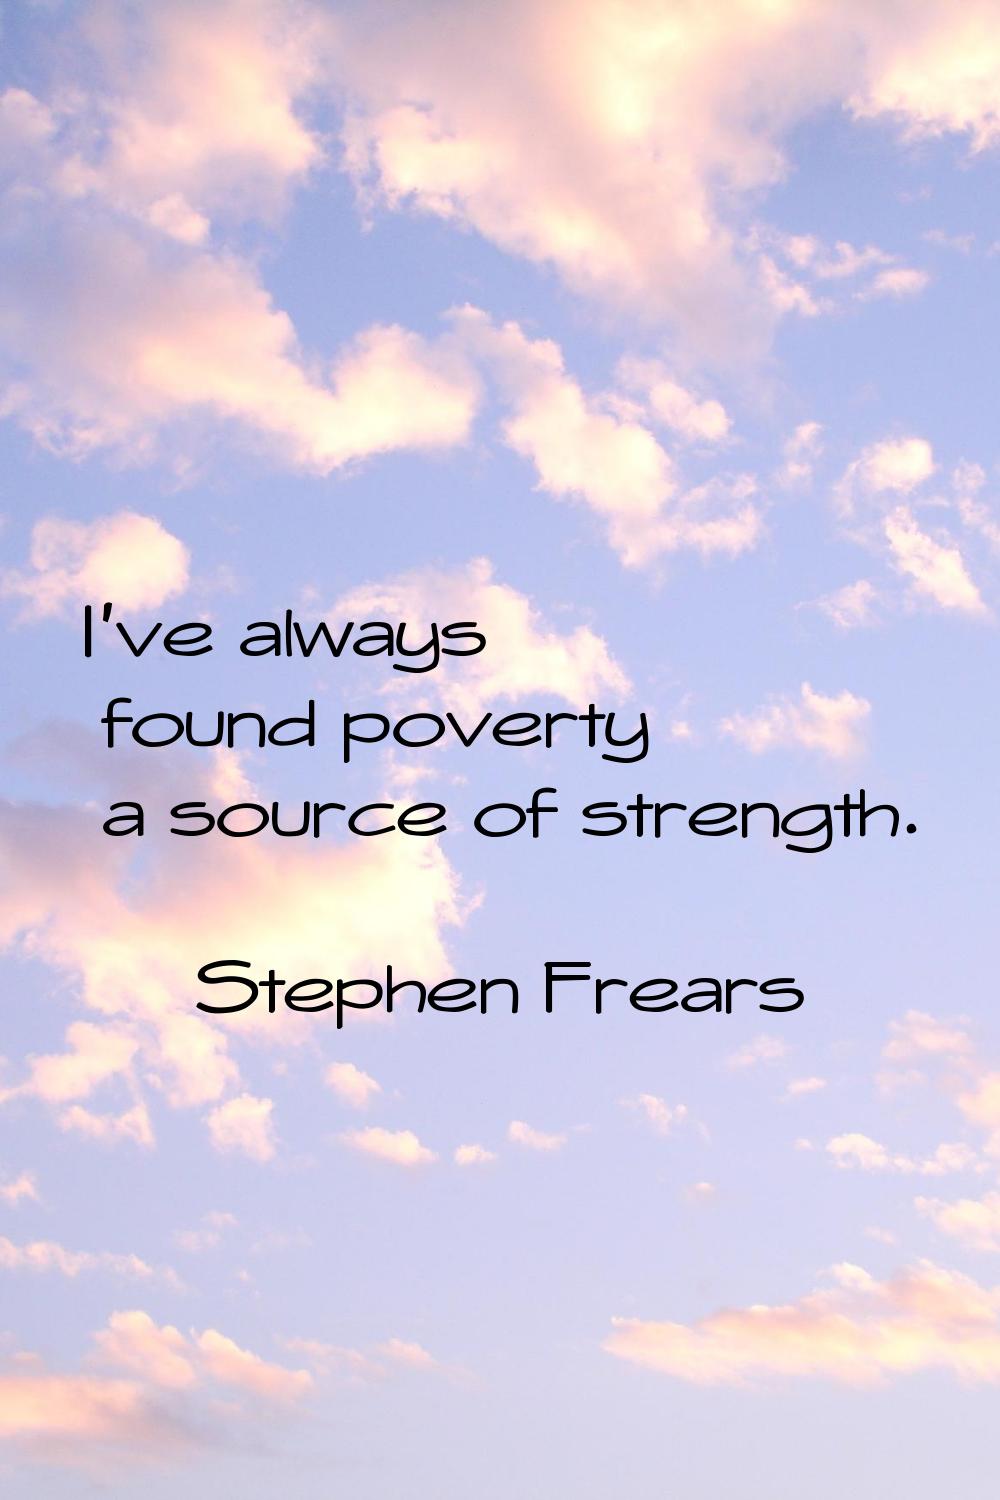 I've always found poverty a source of strength.